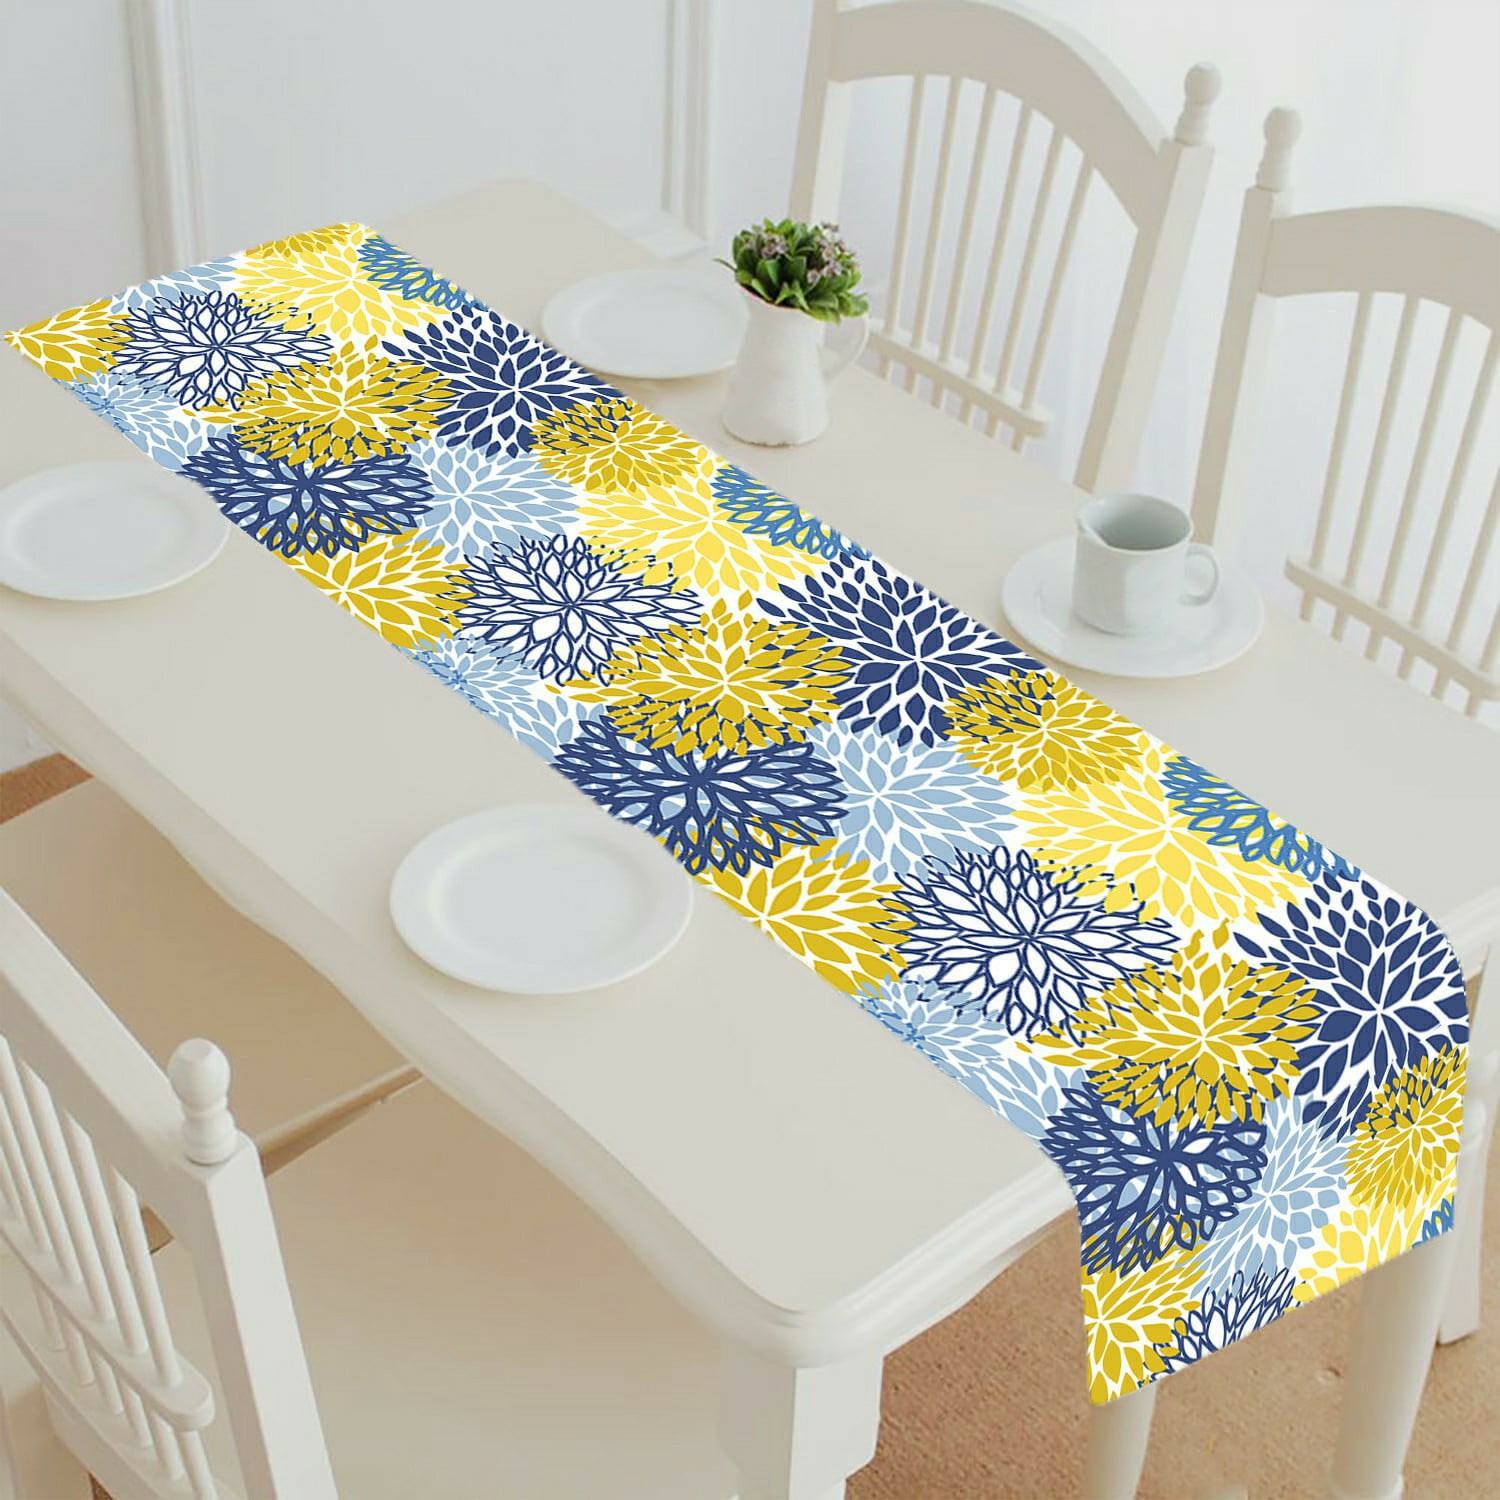 Oarencol Blue Yellow Floral Chrysanthemum Table Runner Double Sided 13x70 inch Polyester Table Cloth